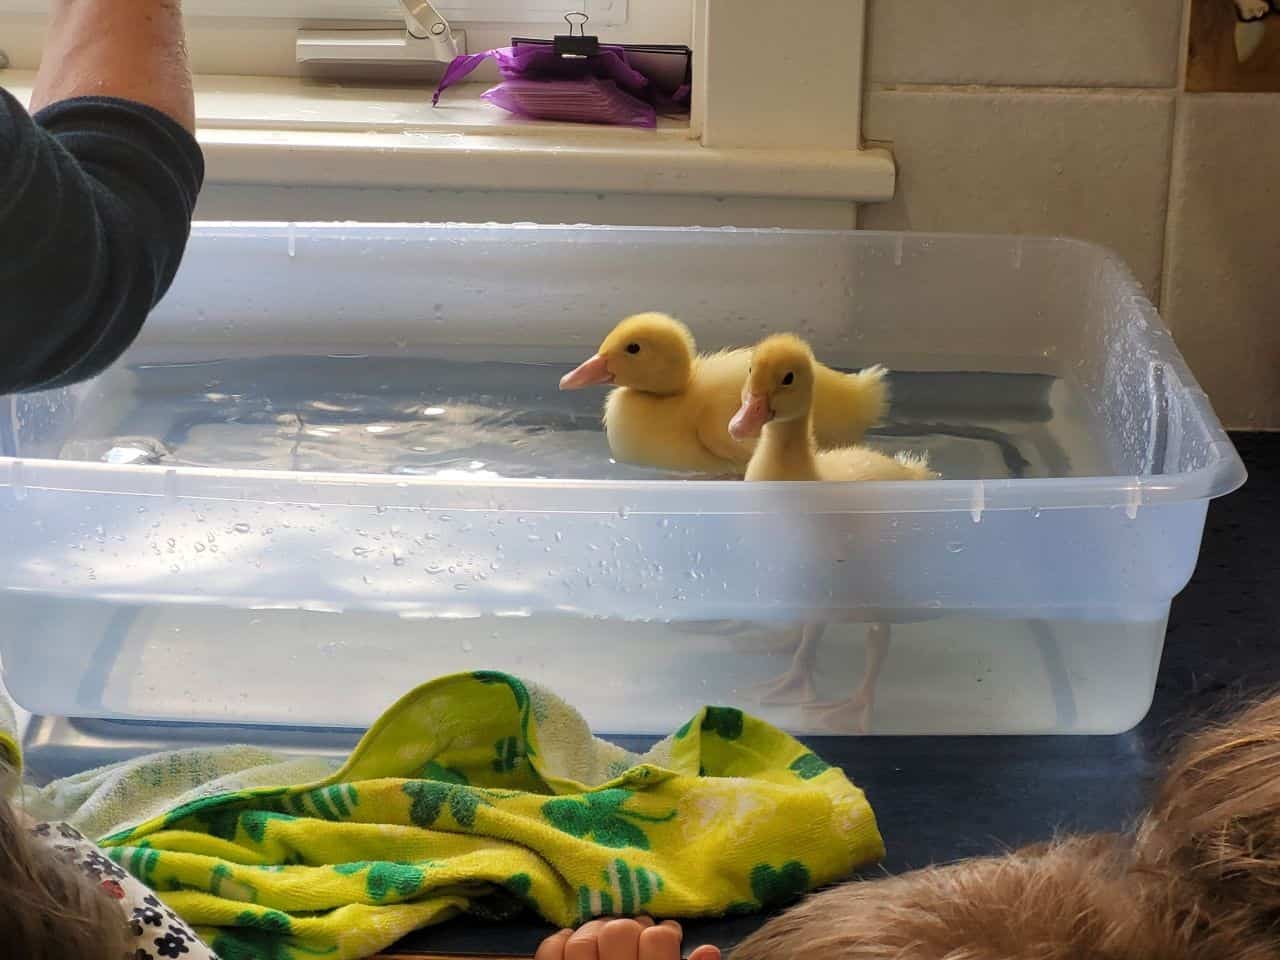 Raise your own ducks in BC Canada. Vernon Teach and Learn raise your own ducks program. Great program for young children in BC Canada.